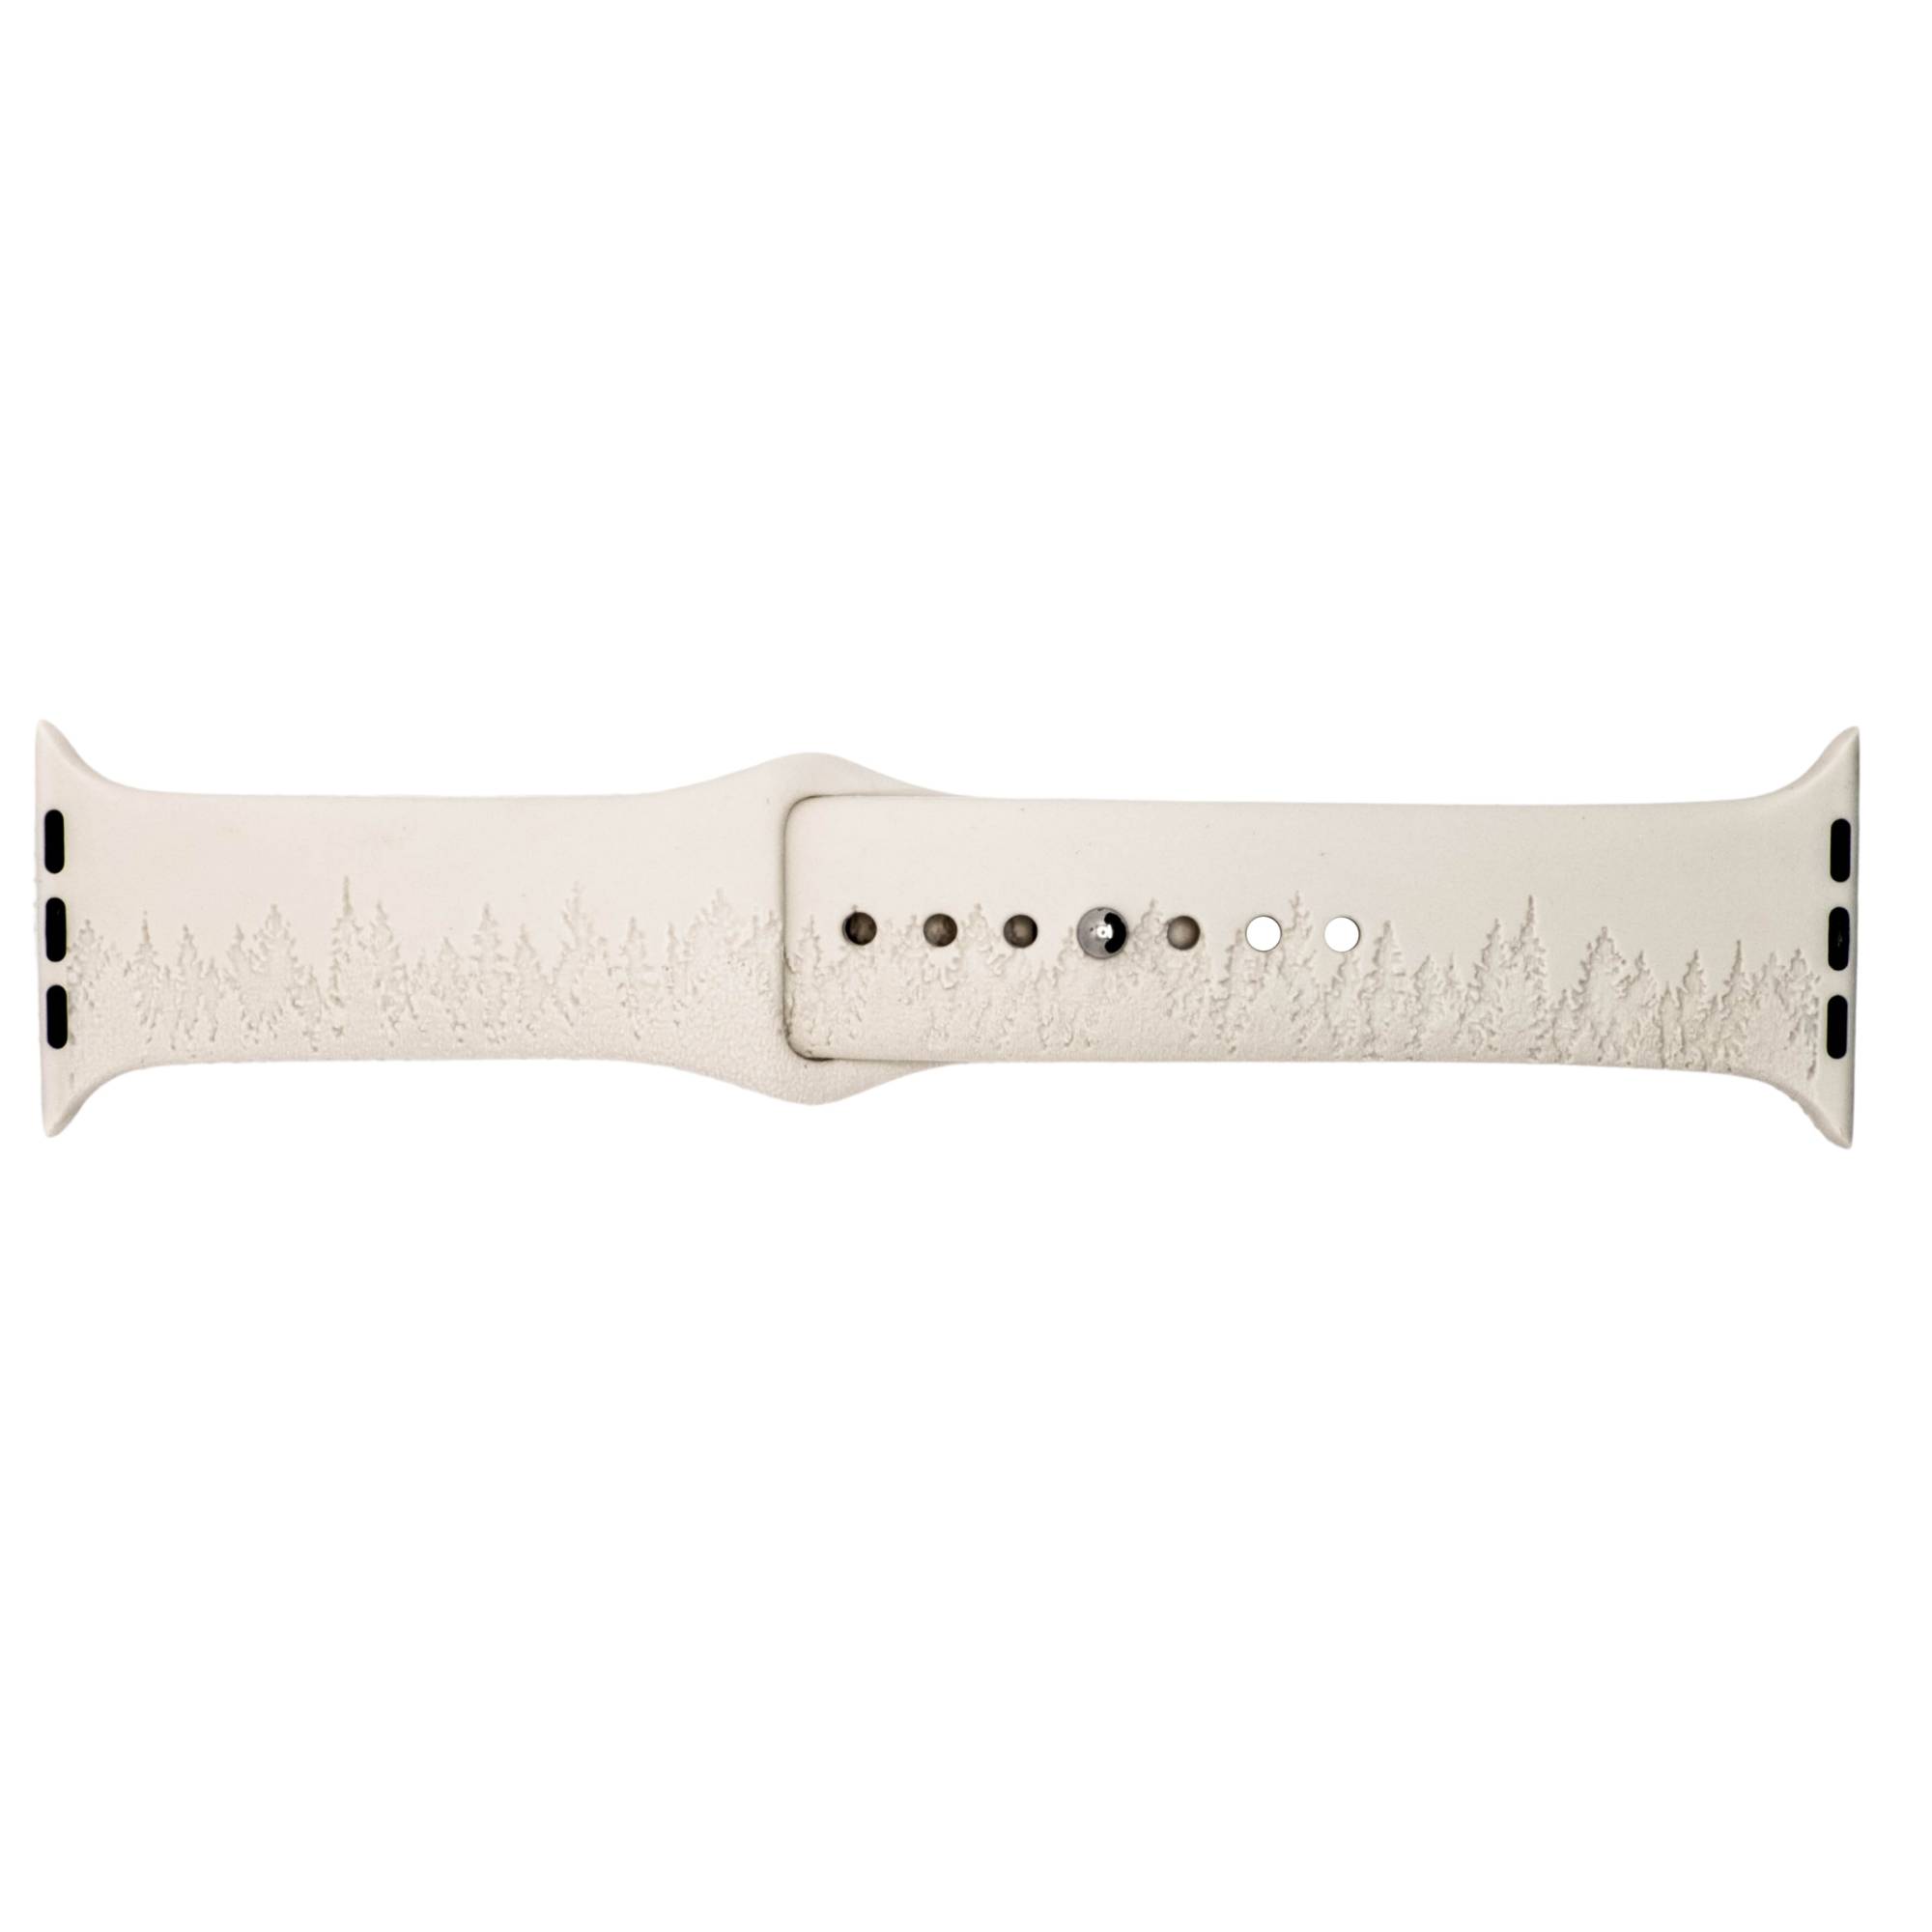 apple watch band lv white engraved